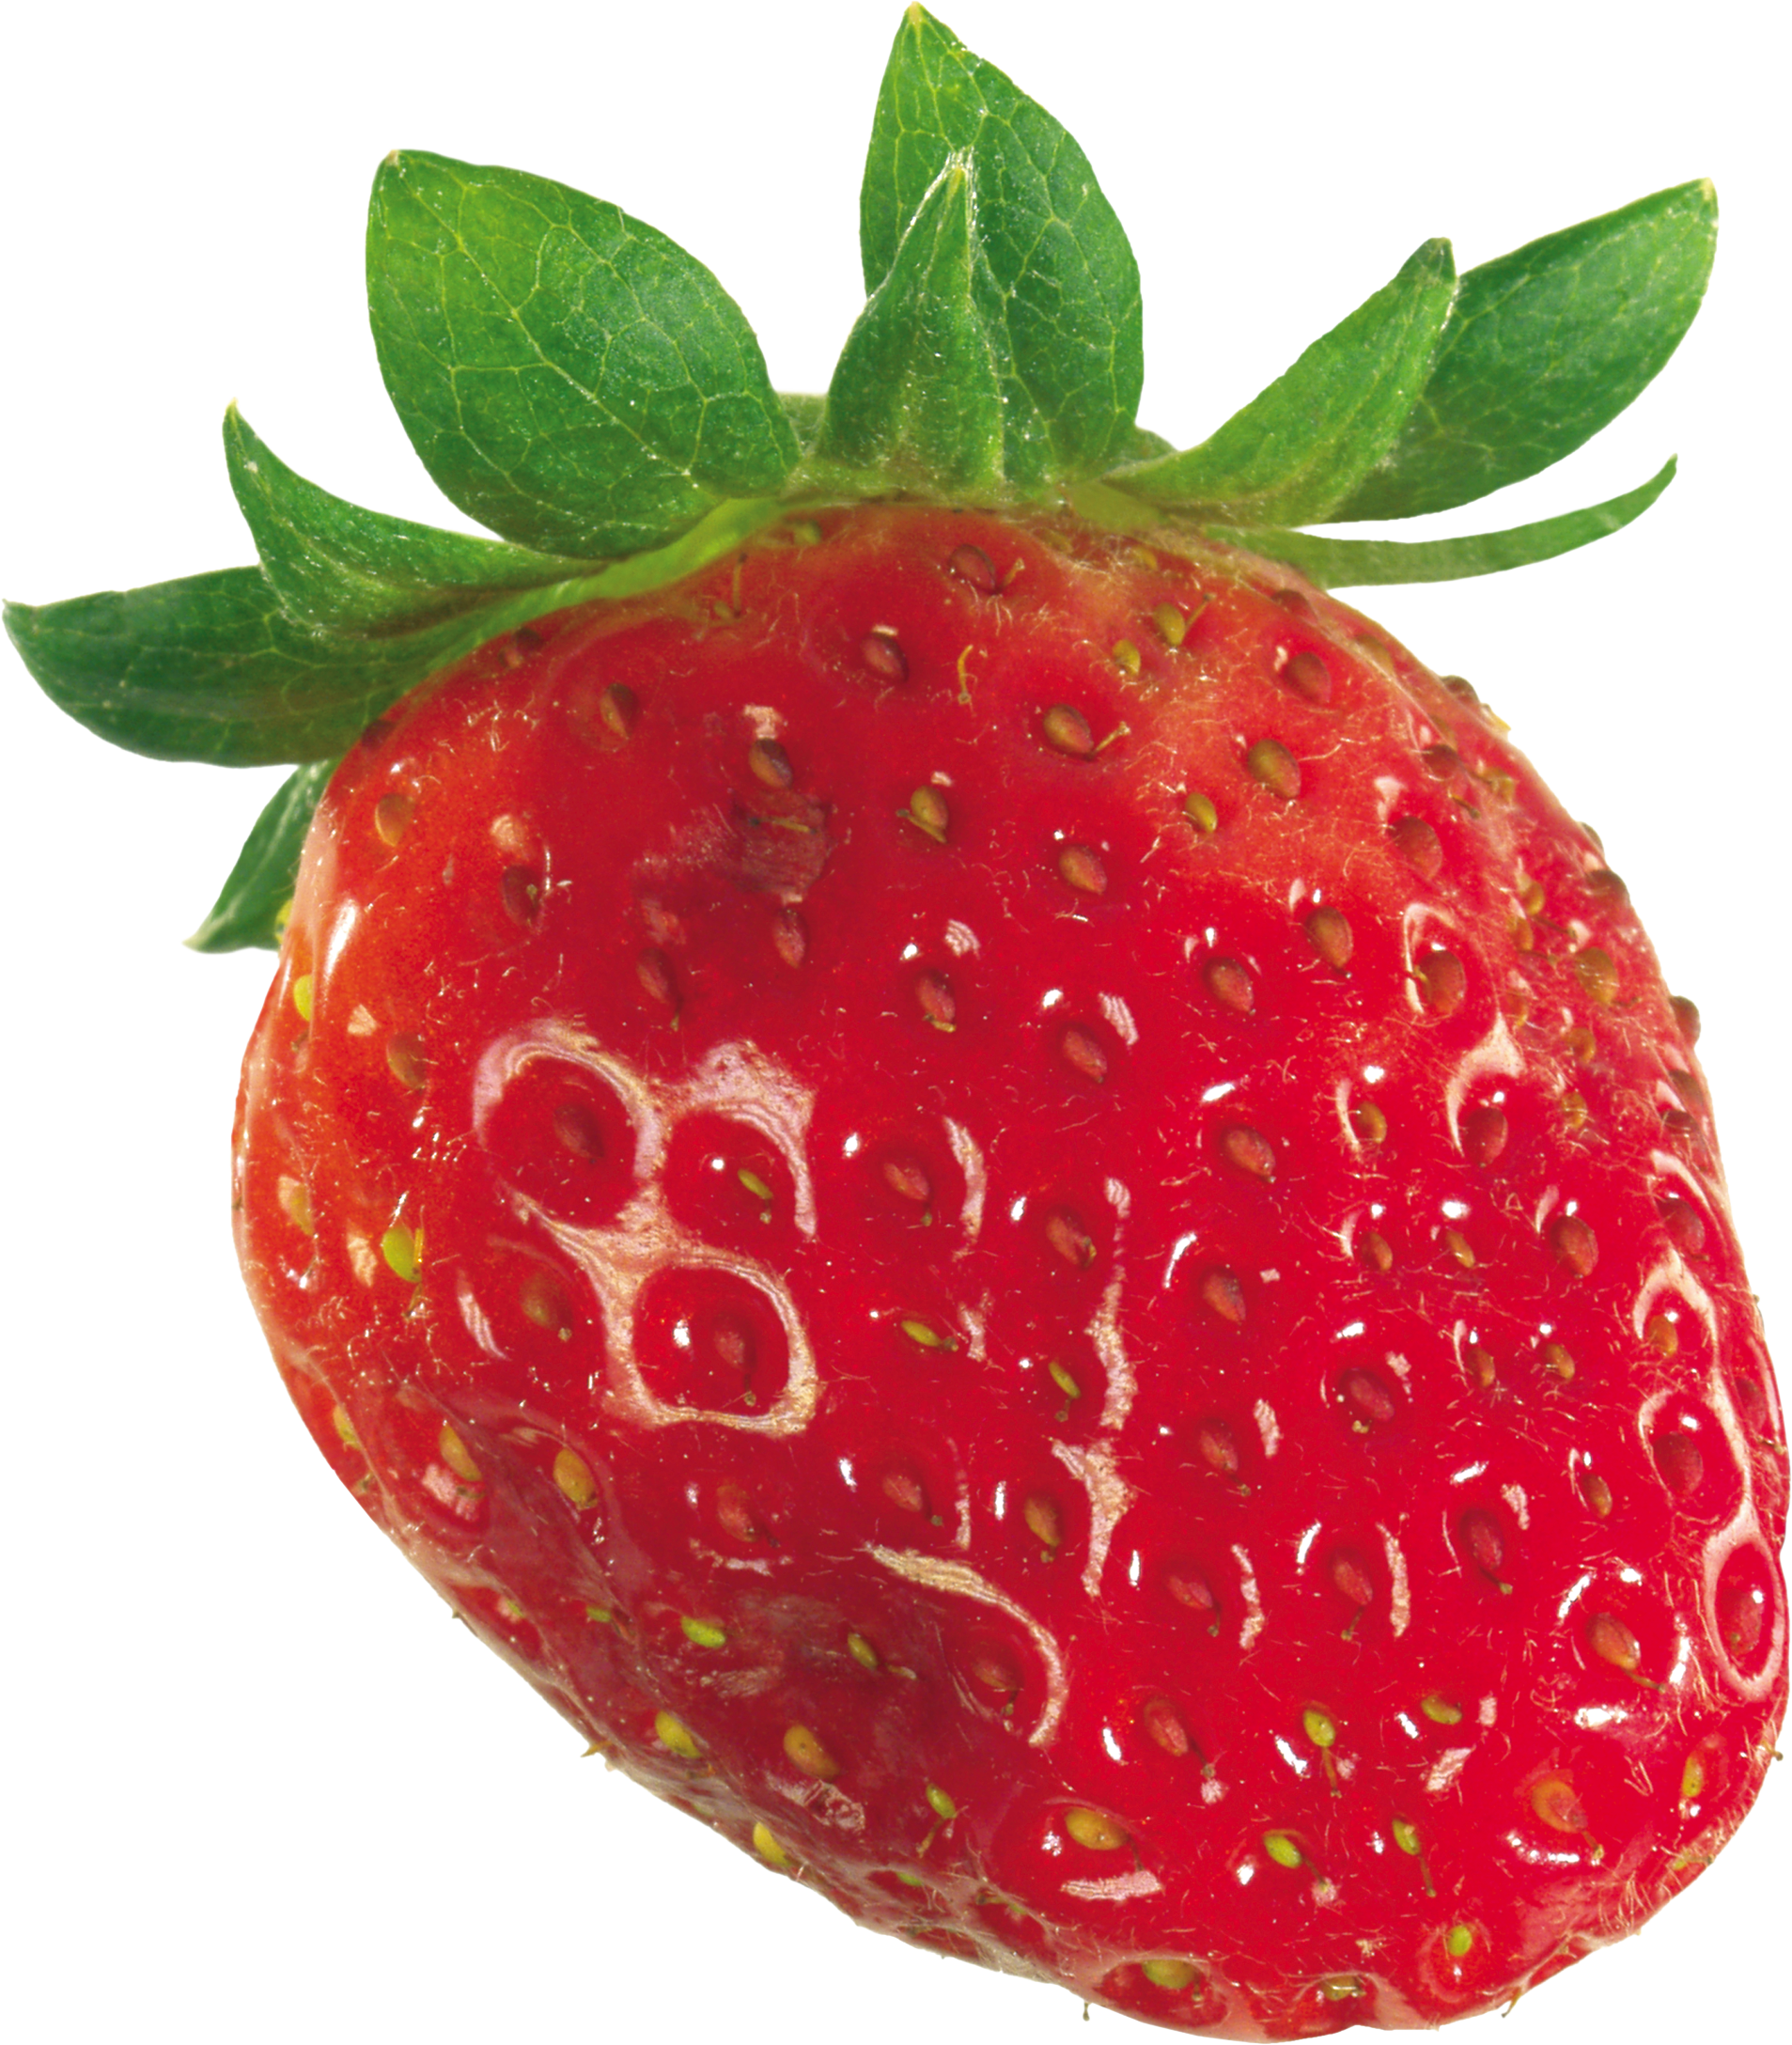 house clipart strawberry